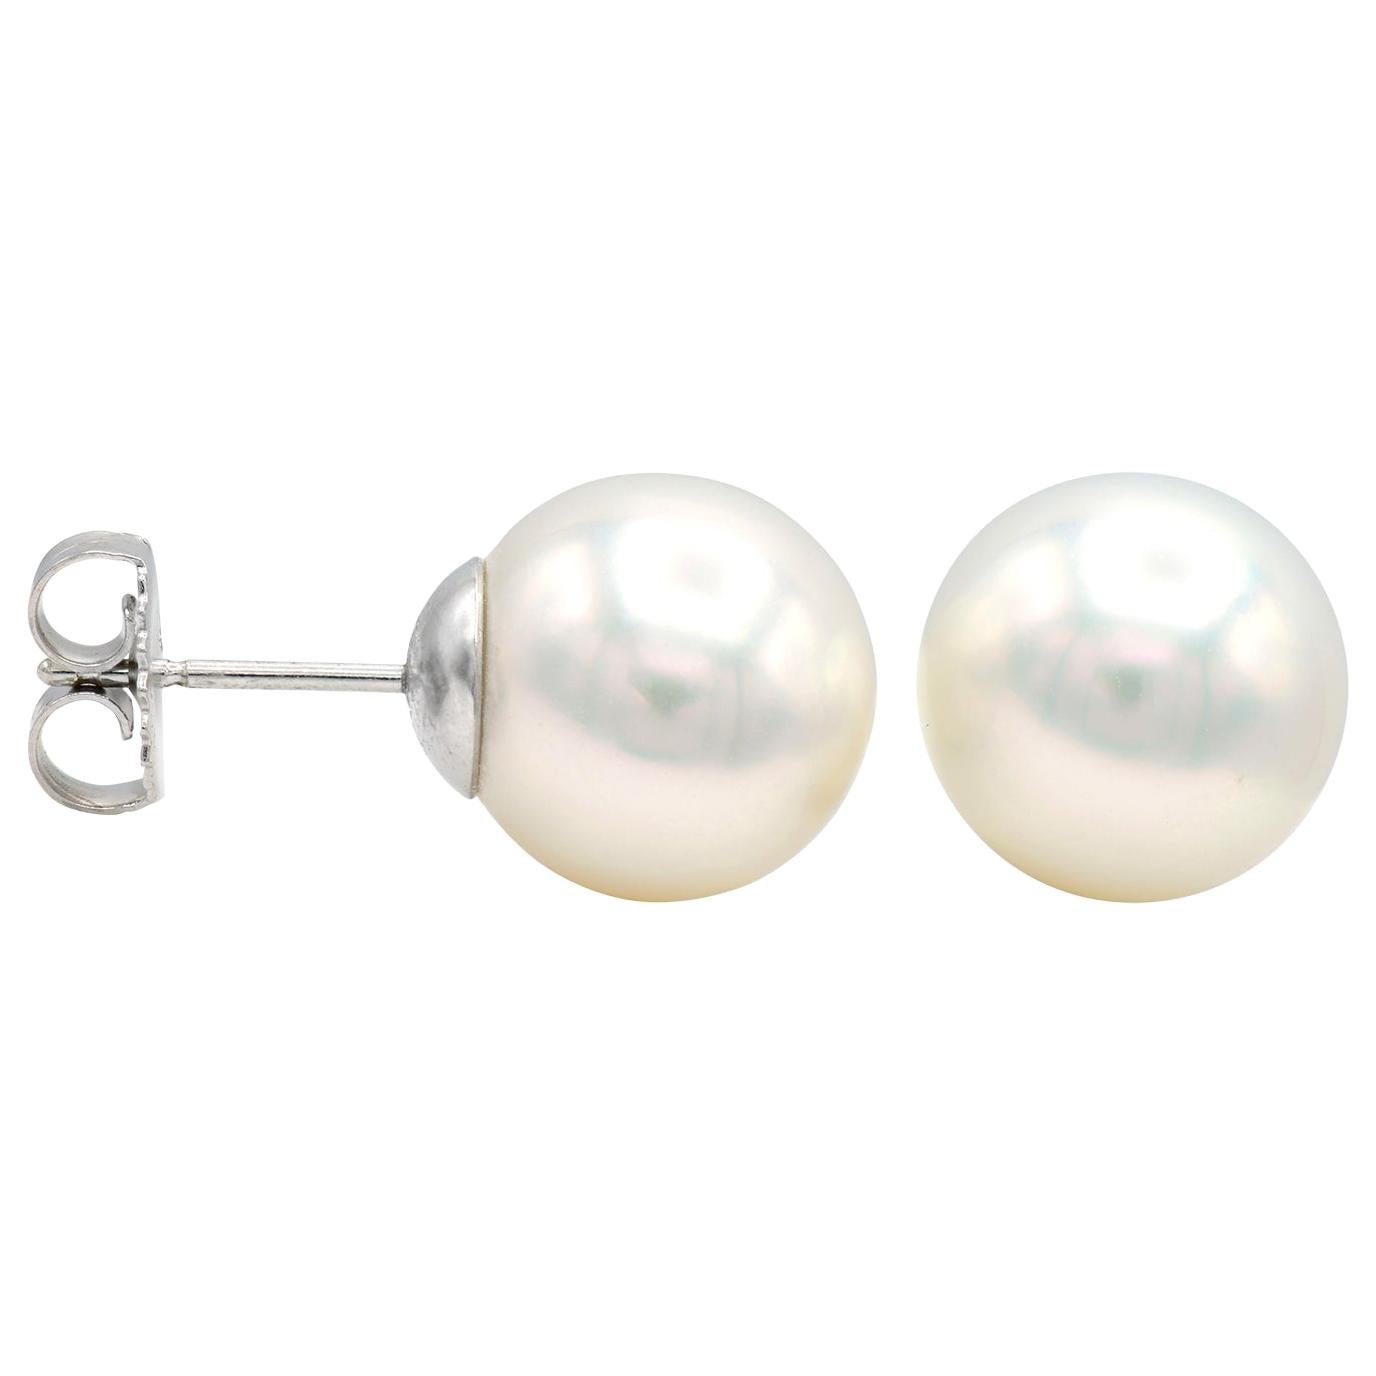 9-9.5mm South Sea Pearl Stud Earrings with 14 Karat White Gold Post and Backs For Sale